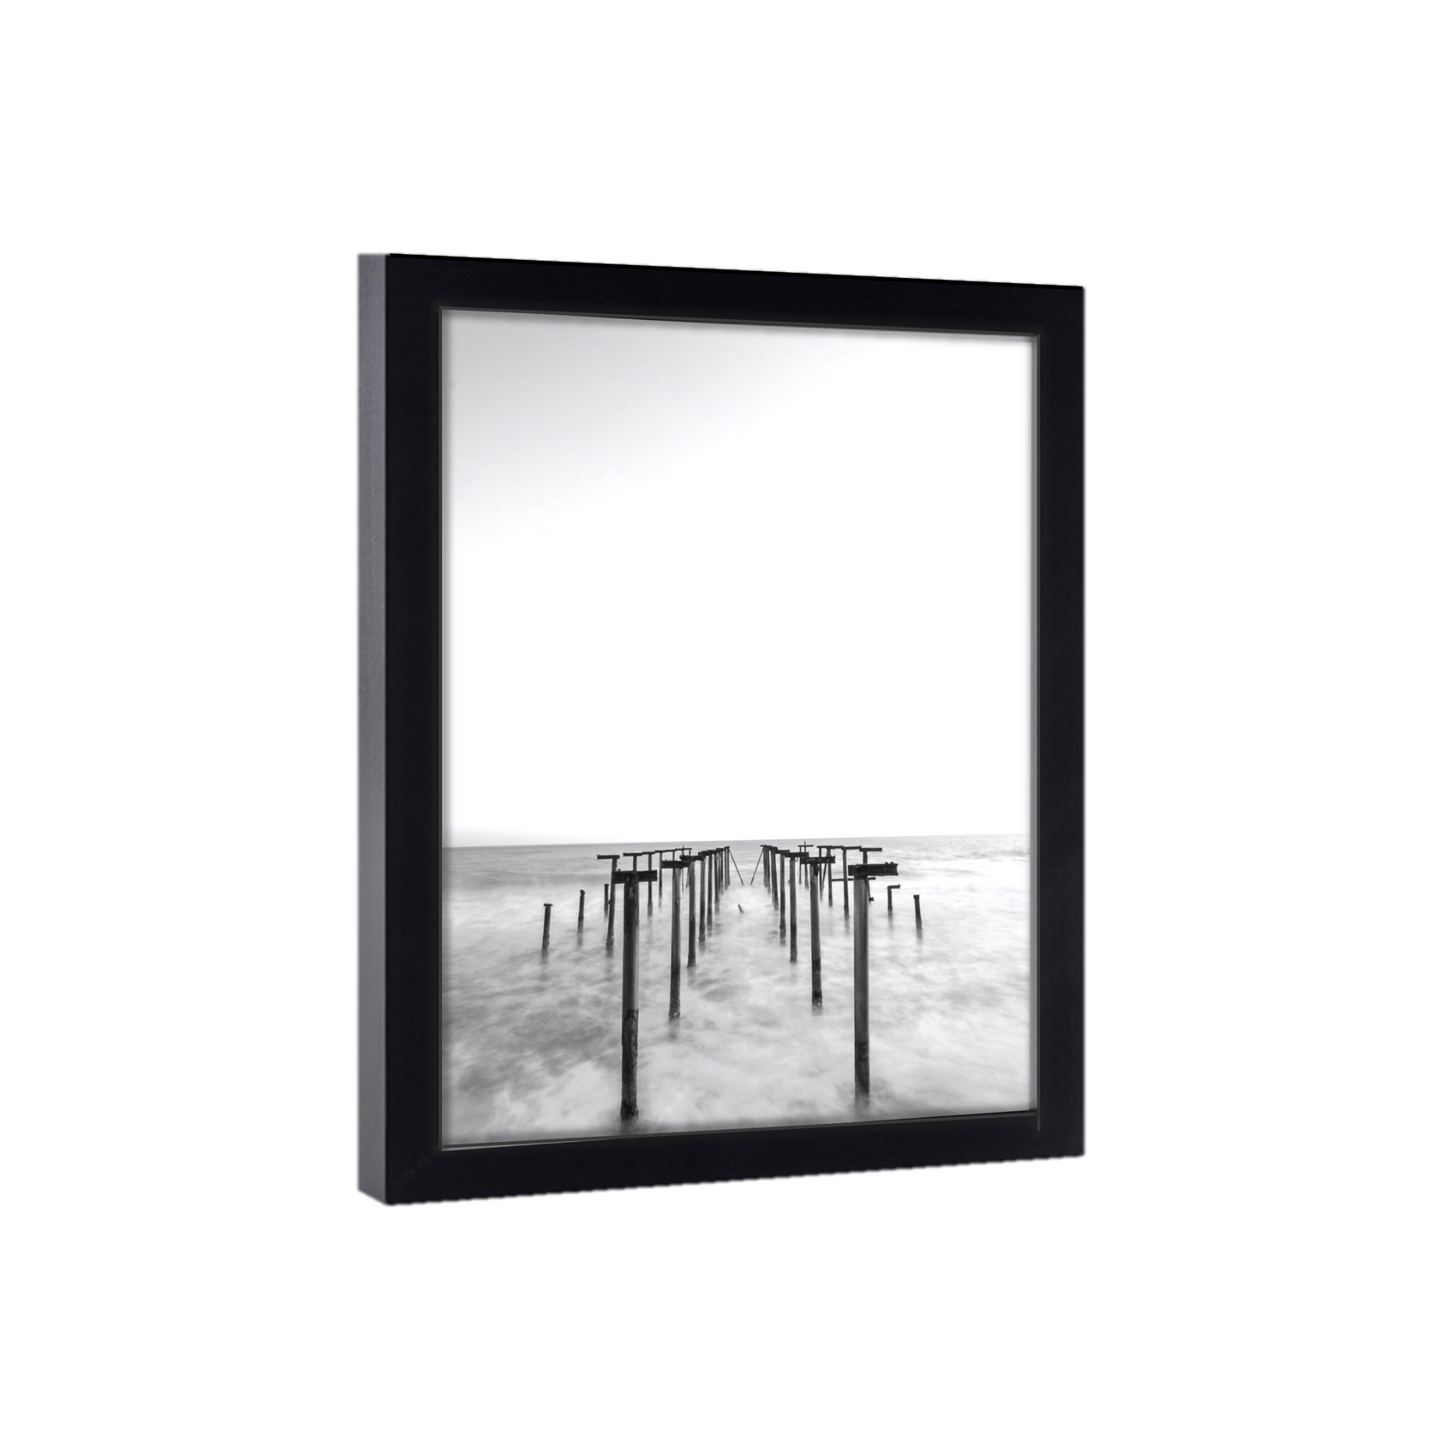 Gallery Wall 35x5 Picture Frame Black Wood 35x5  Poster Size